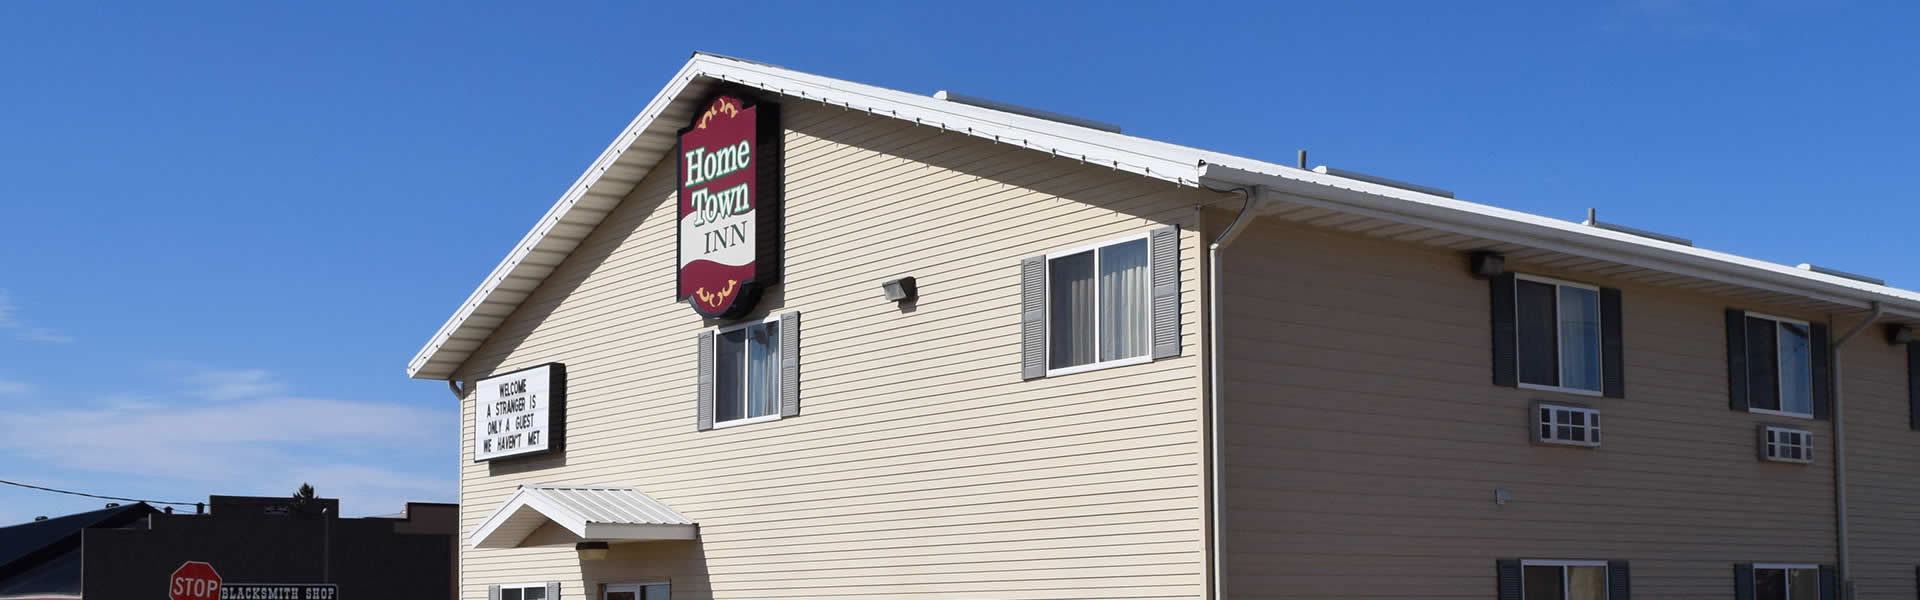 Contact the Hometown Inn of Mayville, North Dakota to book a great room.